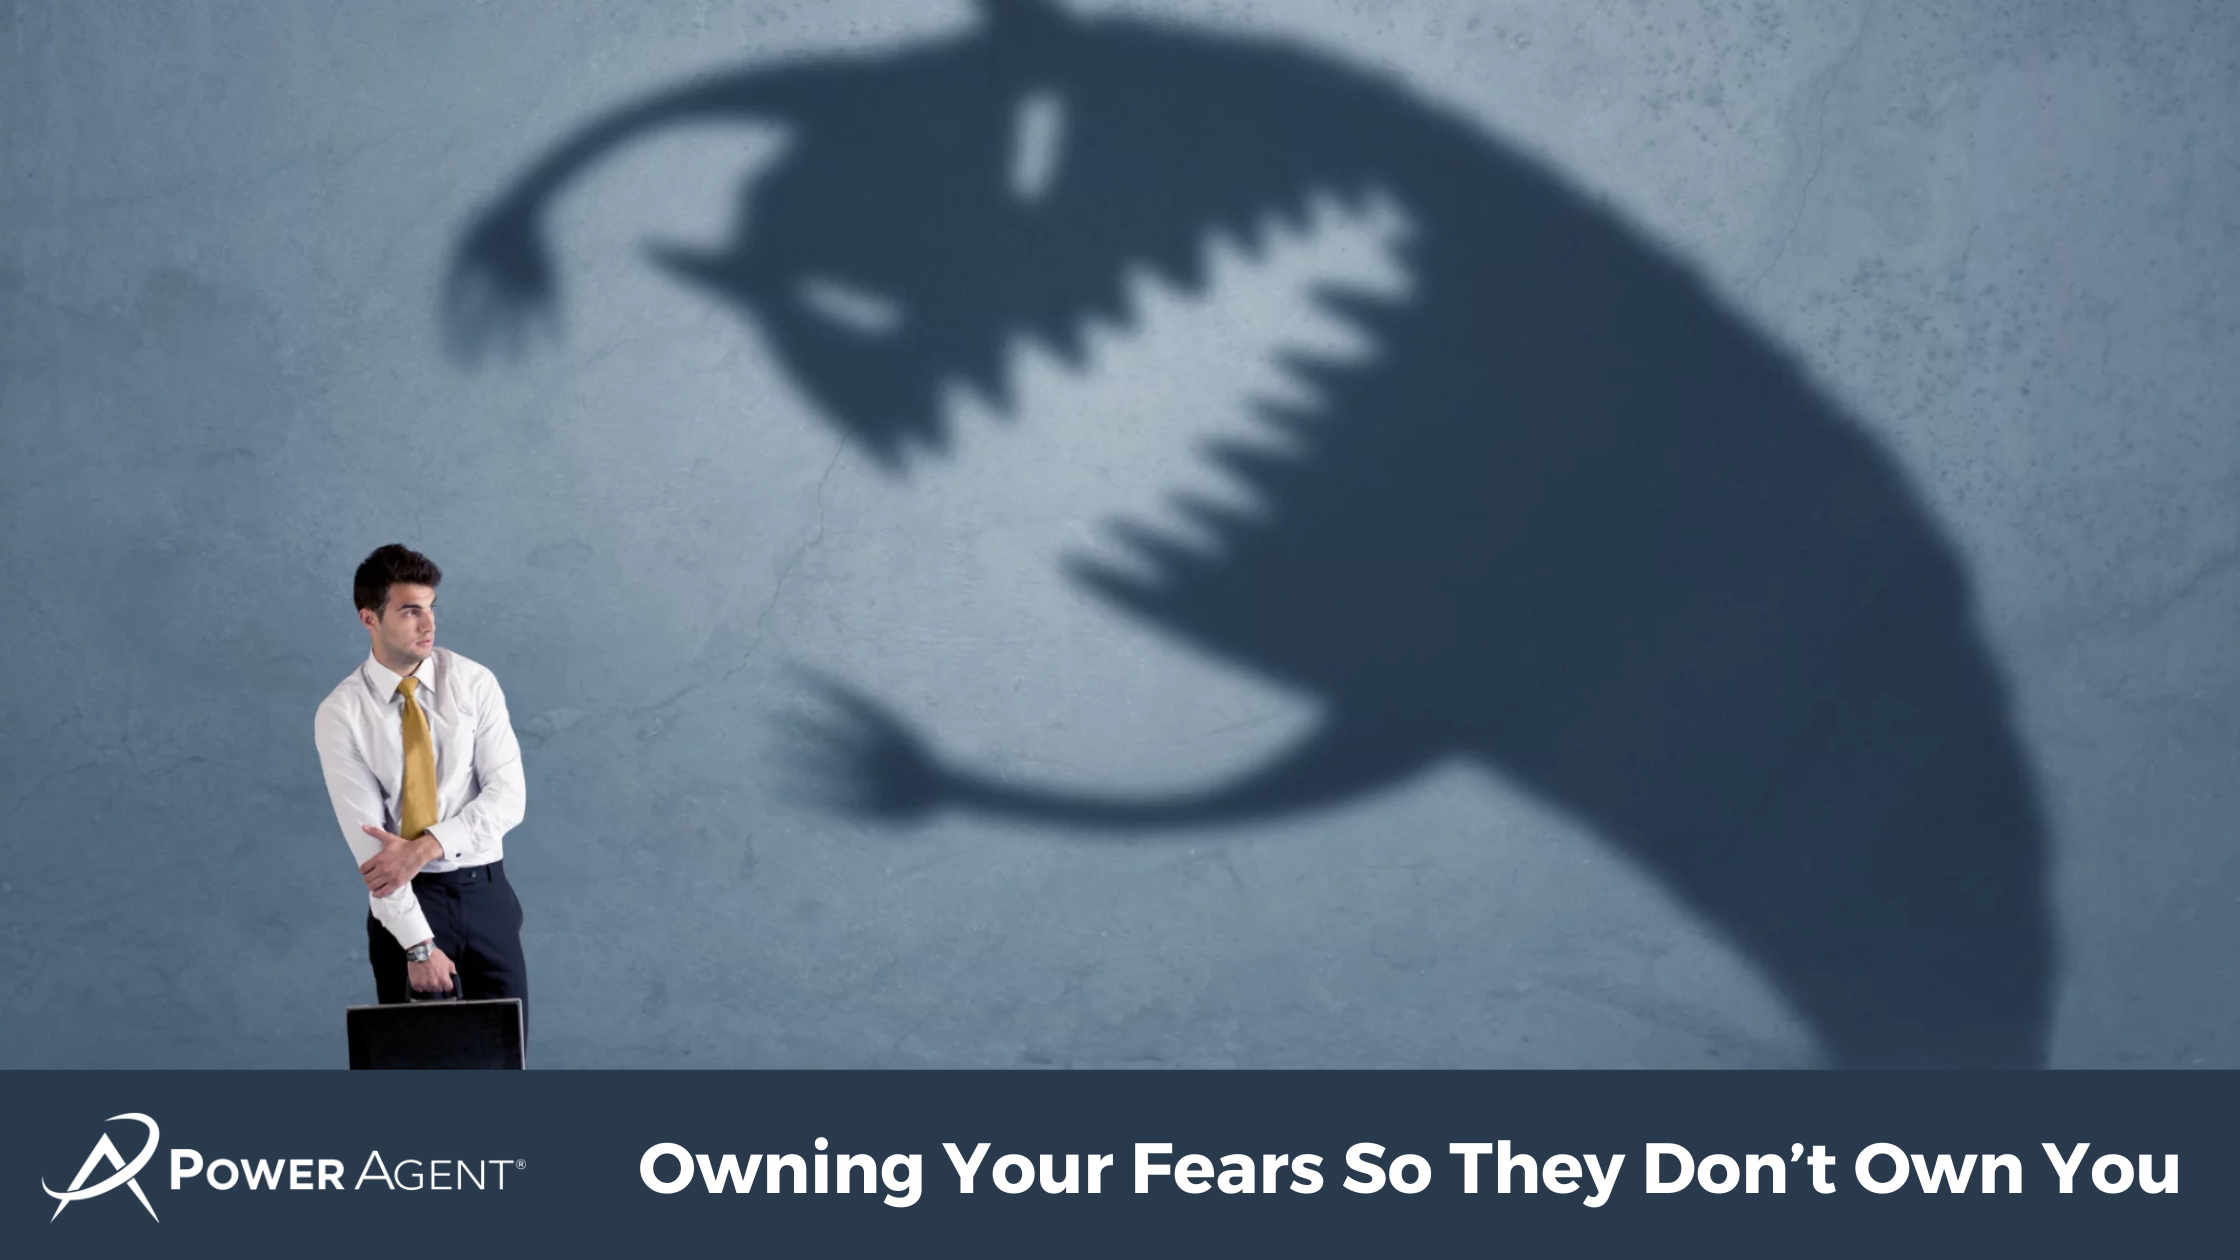 Owning Your Fears So They Don’t Own You